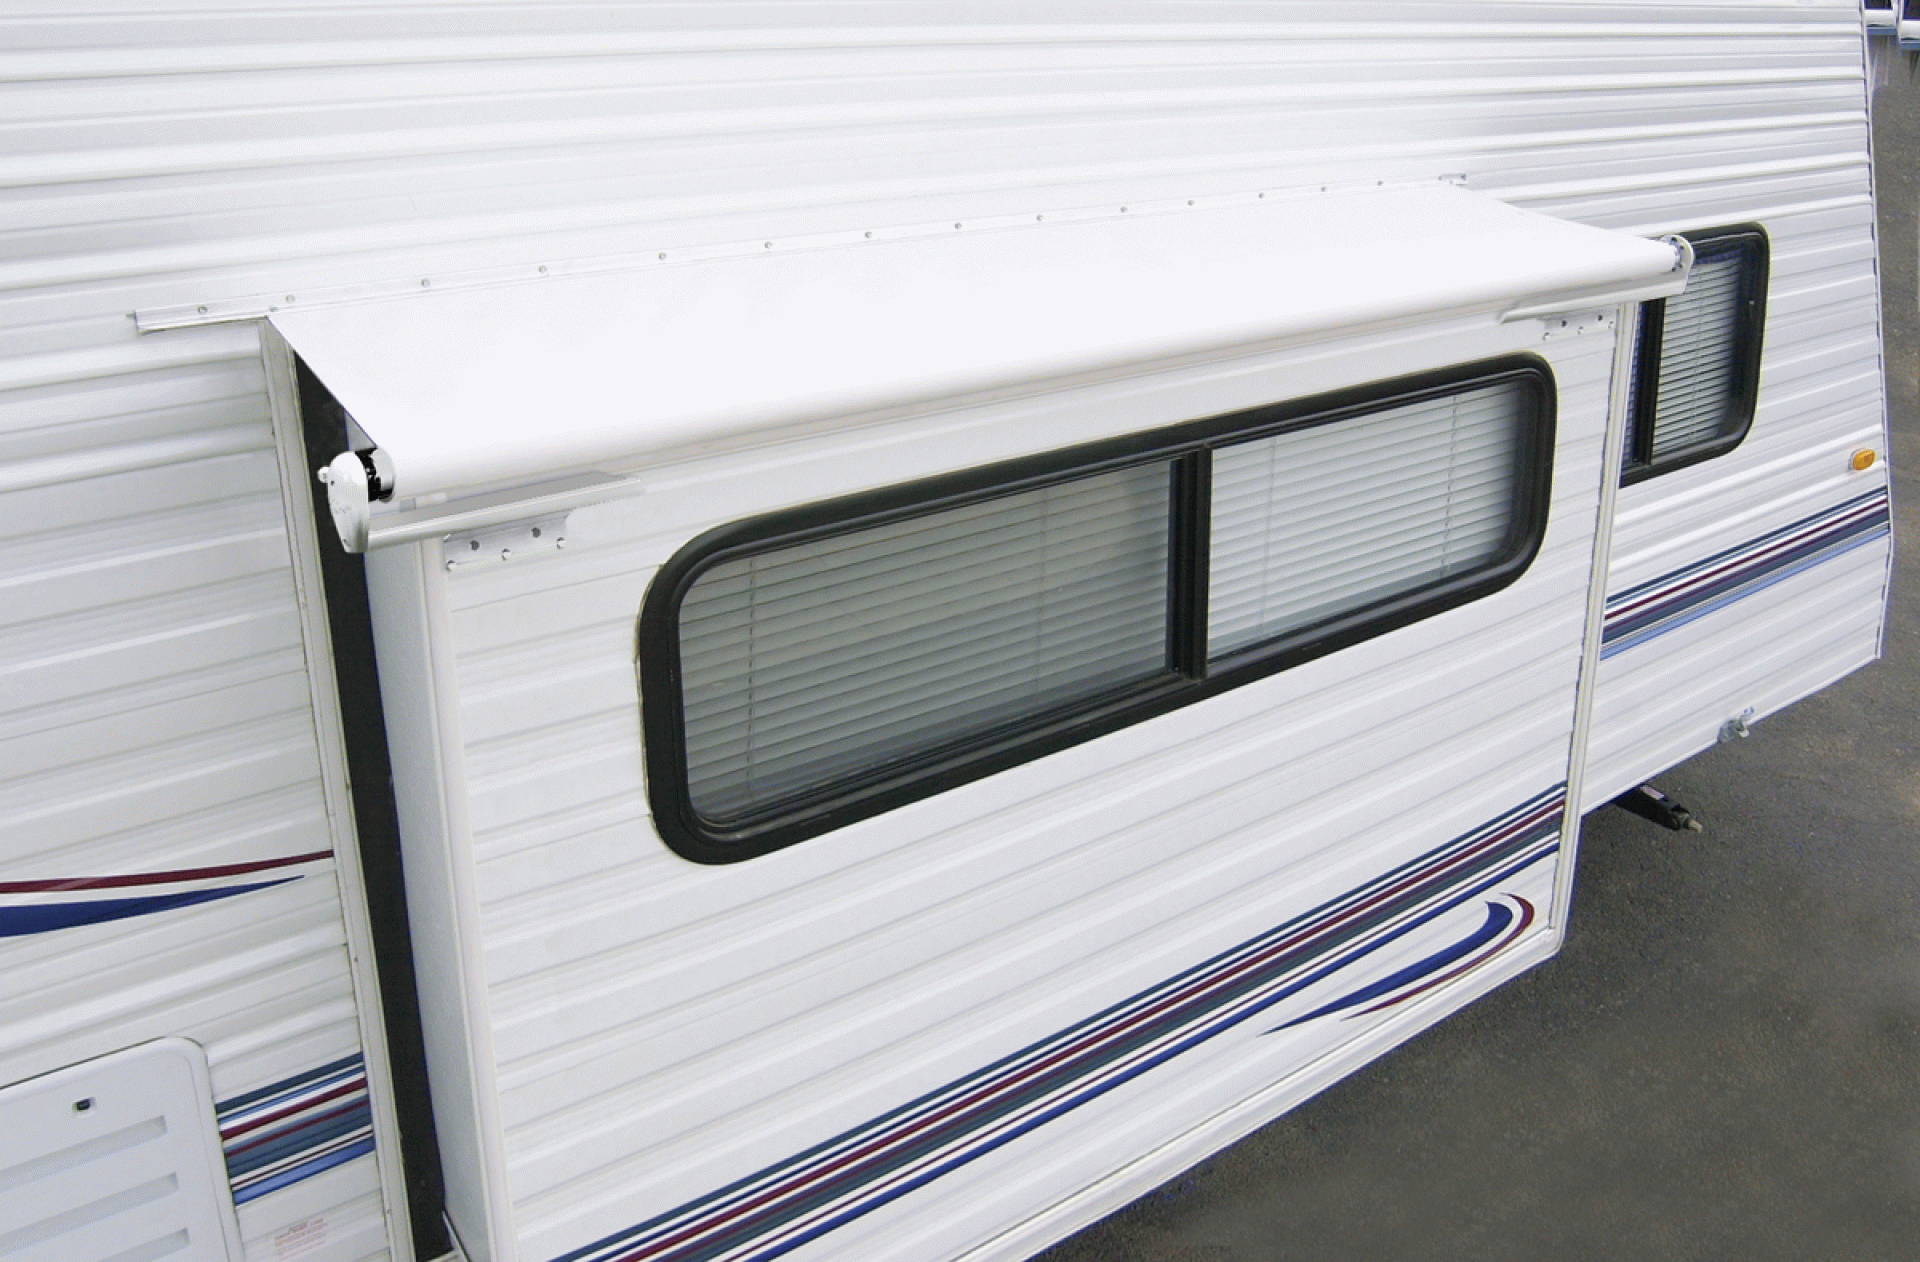 CAREFREE OF COLORADO | LH1960042 | SLIDEOUT COVER AWNING 186" - 196.9" ROOF RANGE WHITE VINYL